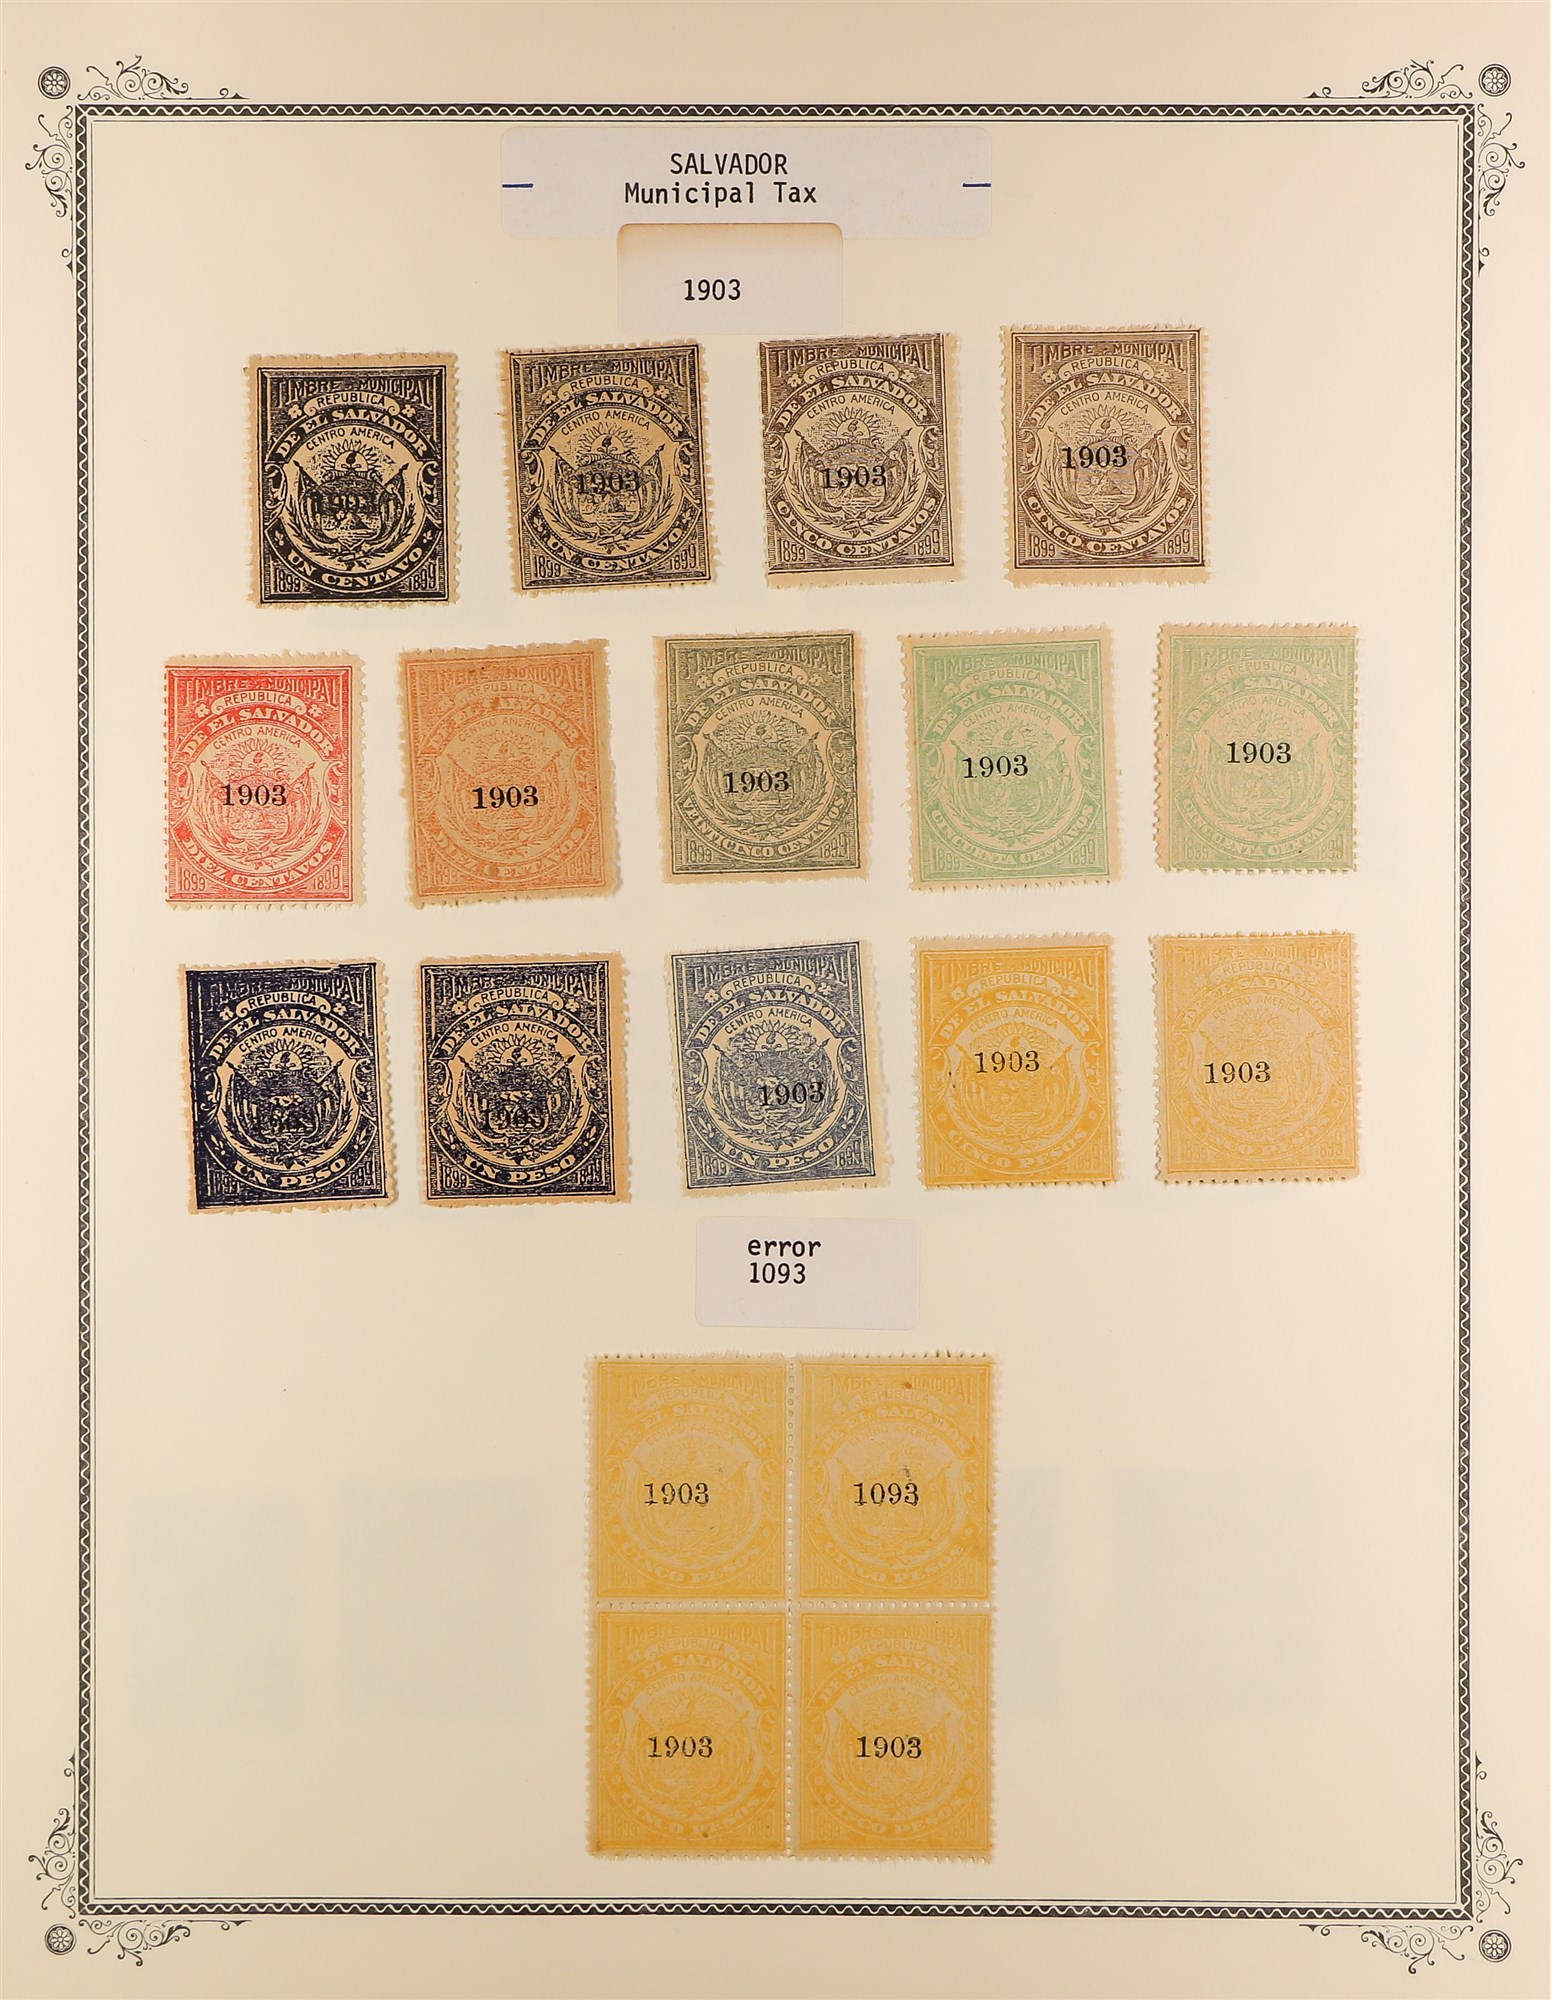 EL SALVADOR REVENUE STAMPS 1883 - 1925 mint & used collection of over 400 revenue stamps, on album - Image 19 of 27